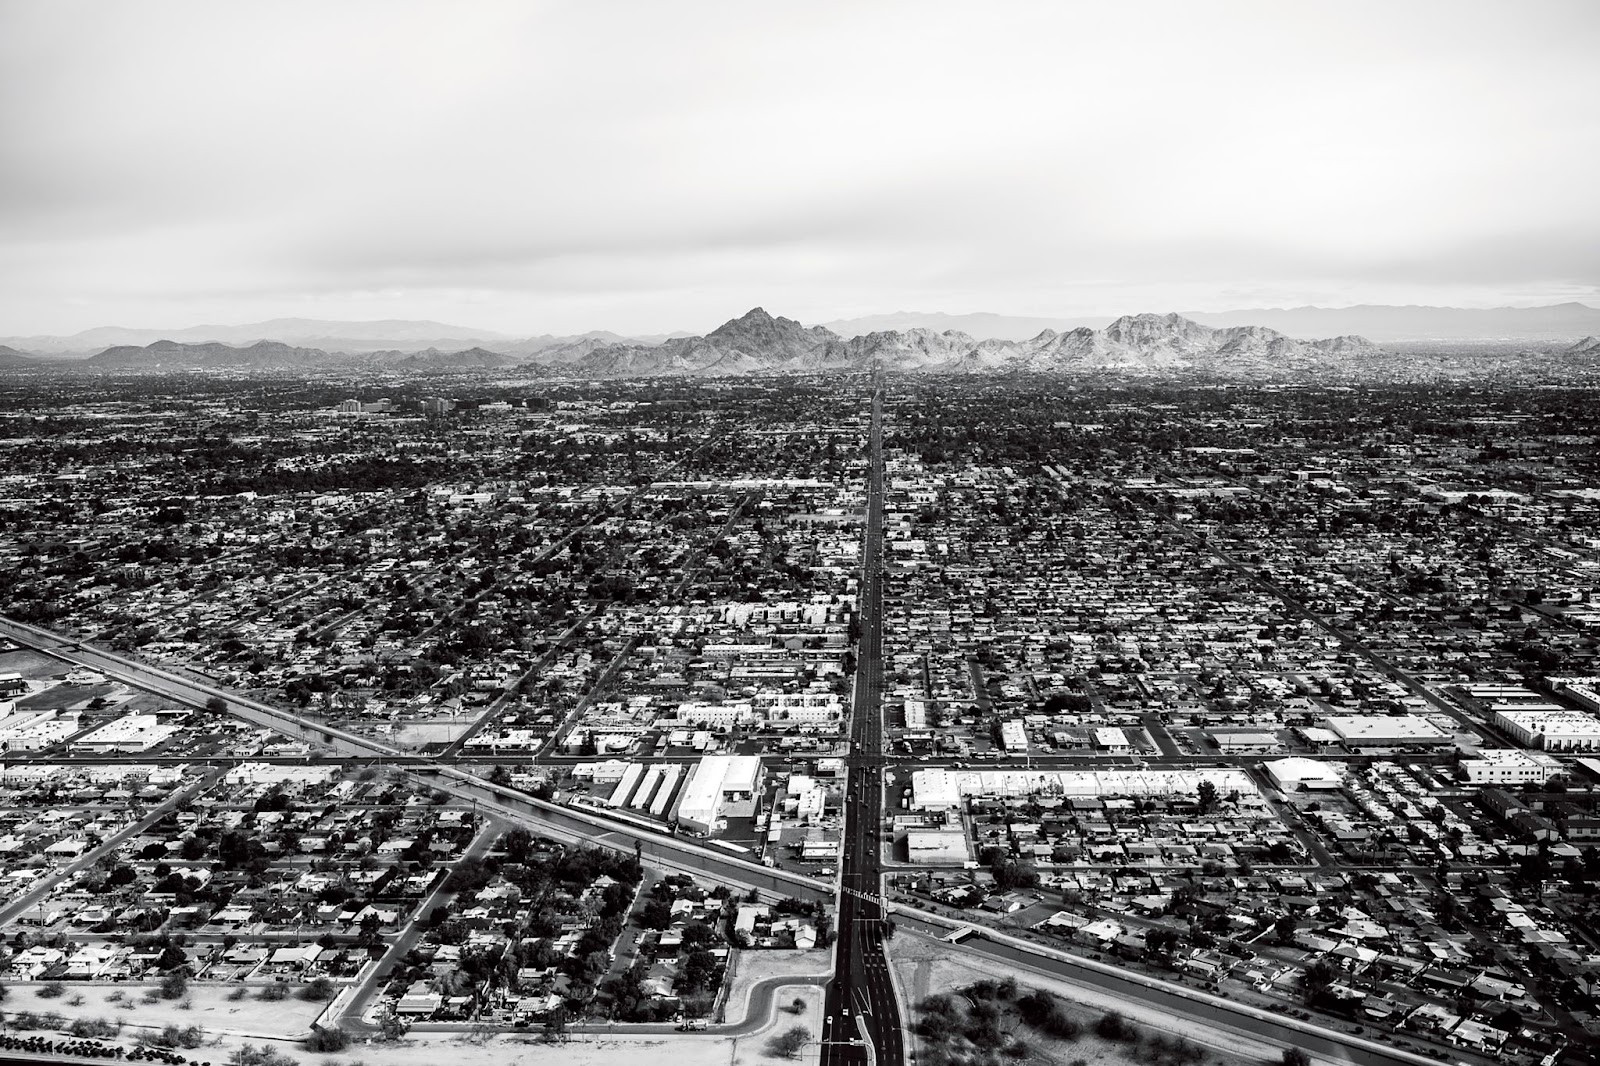 Rapid Growth in Arizona’s Suburbs Bets Against an Uncertain Water Supply